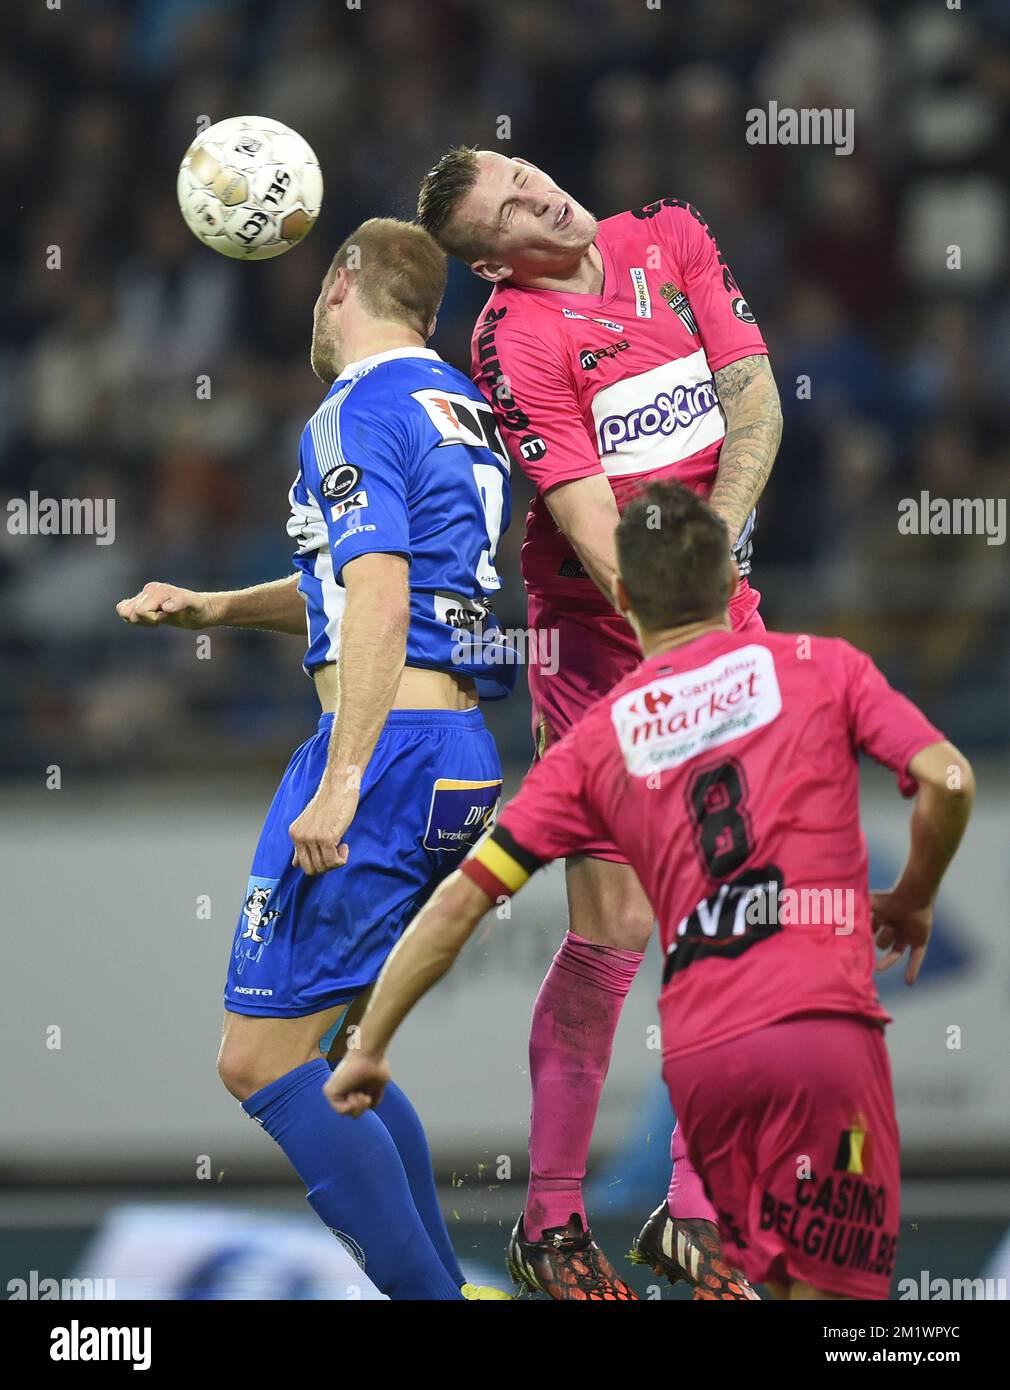 20141018 - GENT, BELGIUM: Charleroi's Clement Taimont and Gent's Laurent Depoitre fight for the ball during the Jupiler Pro League match between AA Gent and Charleroi, in Gent, Saturday 18 October 2014, on day 11 of the Belgian soccer championship. BELGA PHOTO JOHN THYS Stock Photo